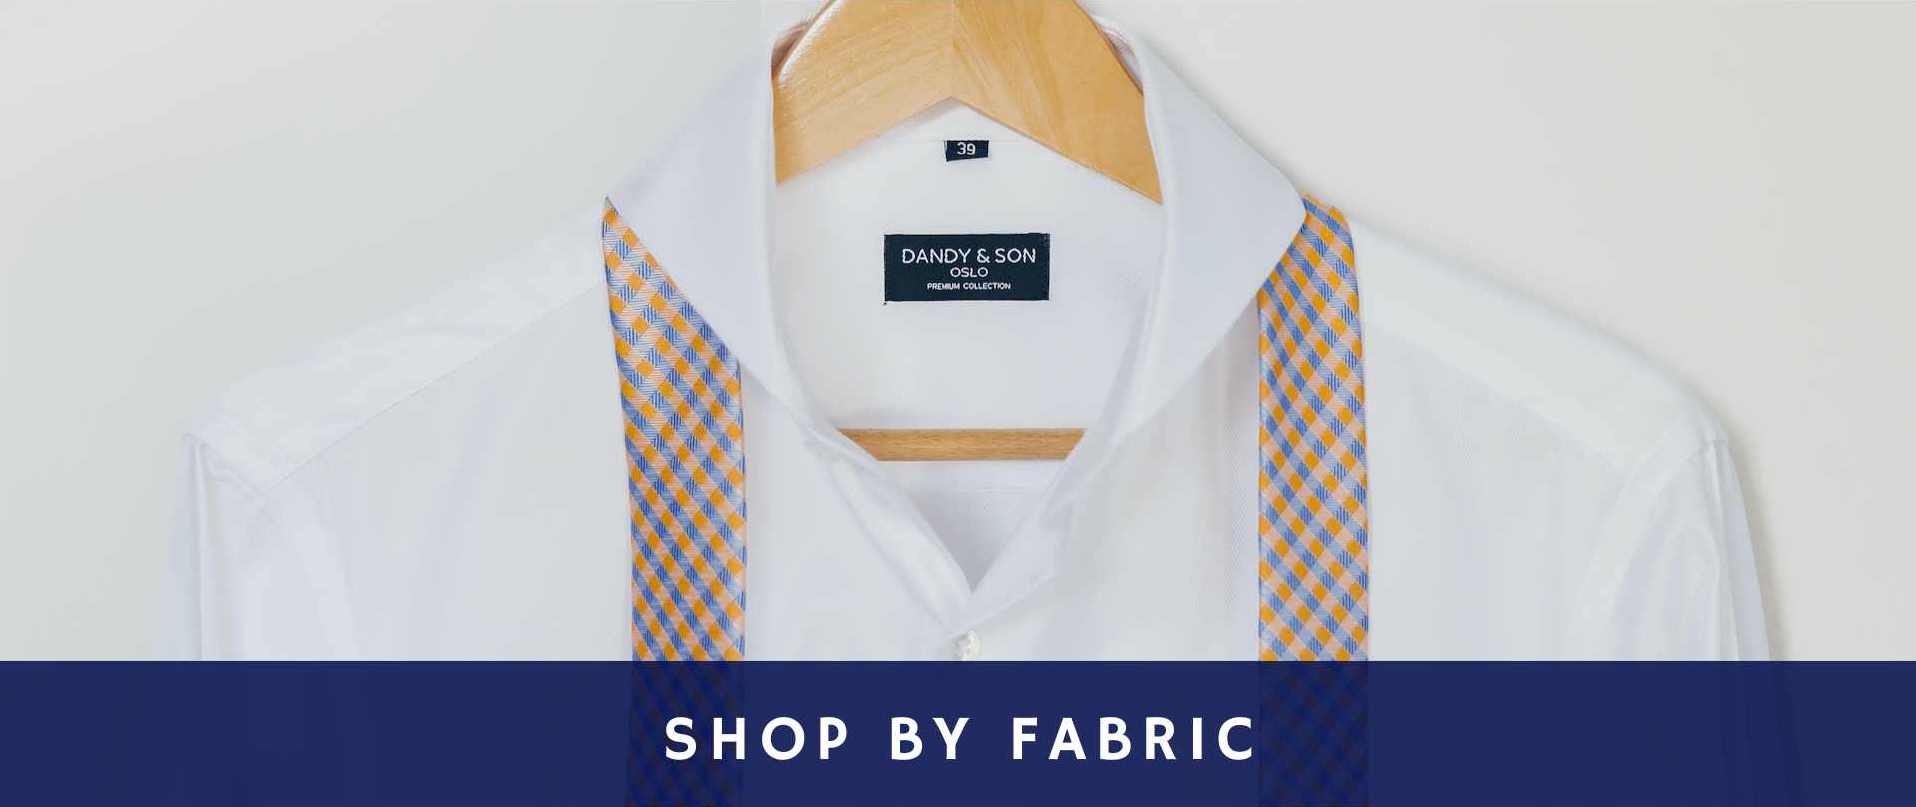 dandy and son white extreme cutaway collar shirt with tie